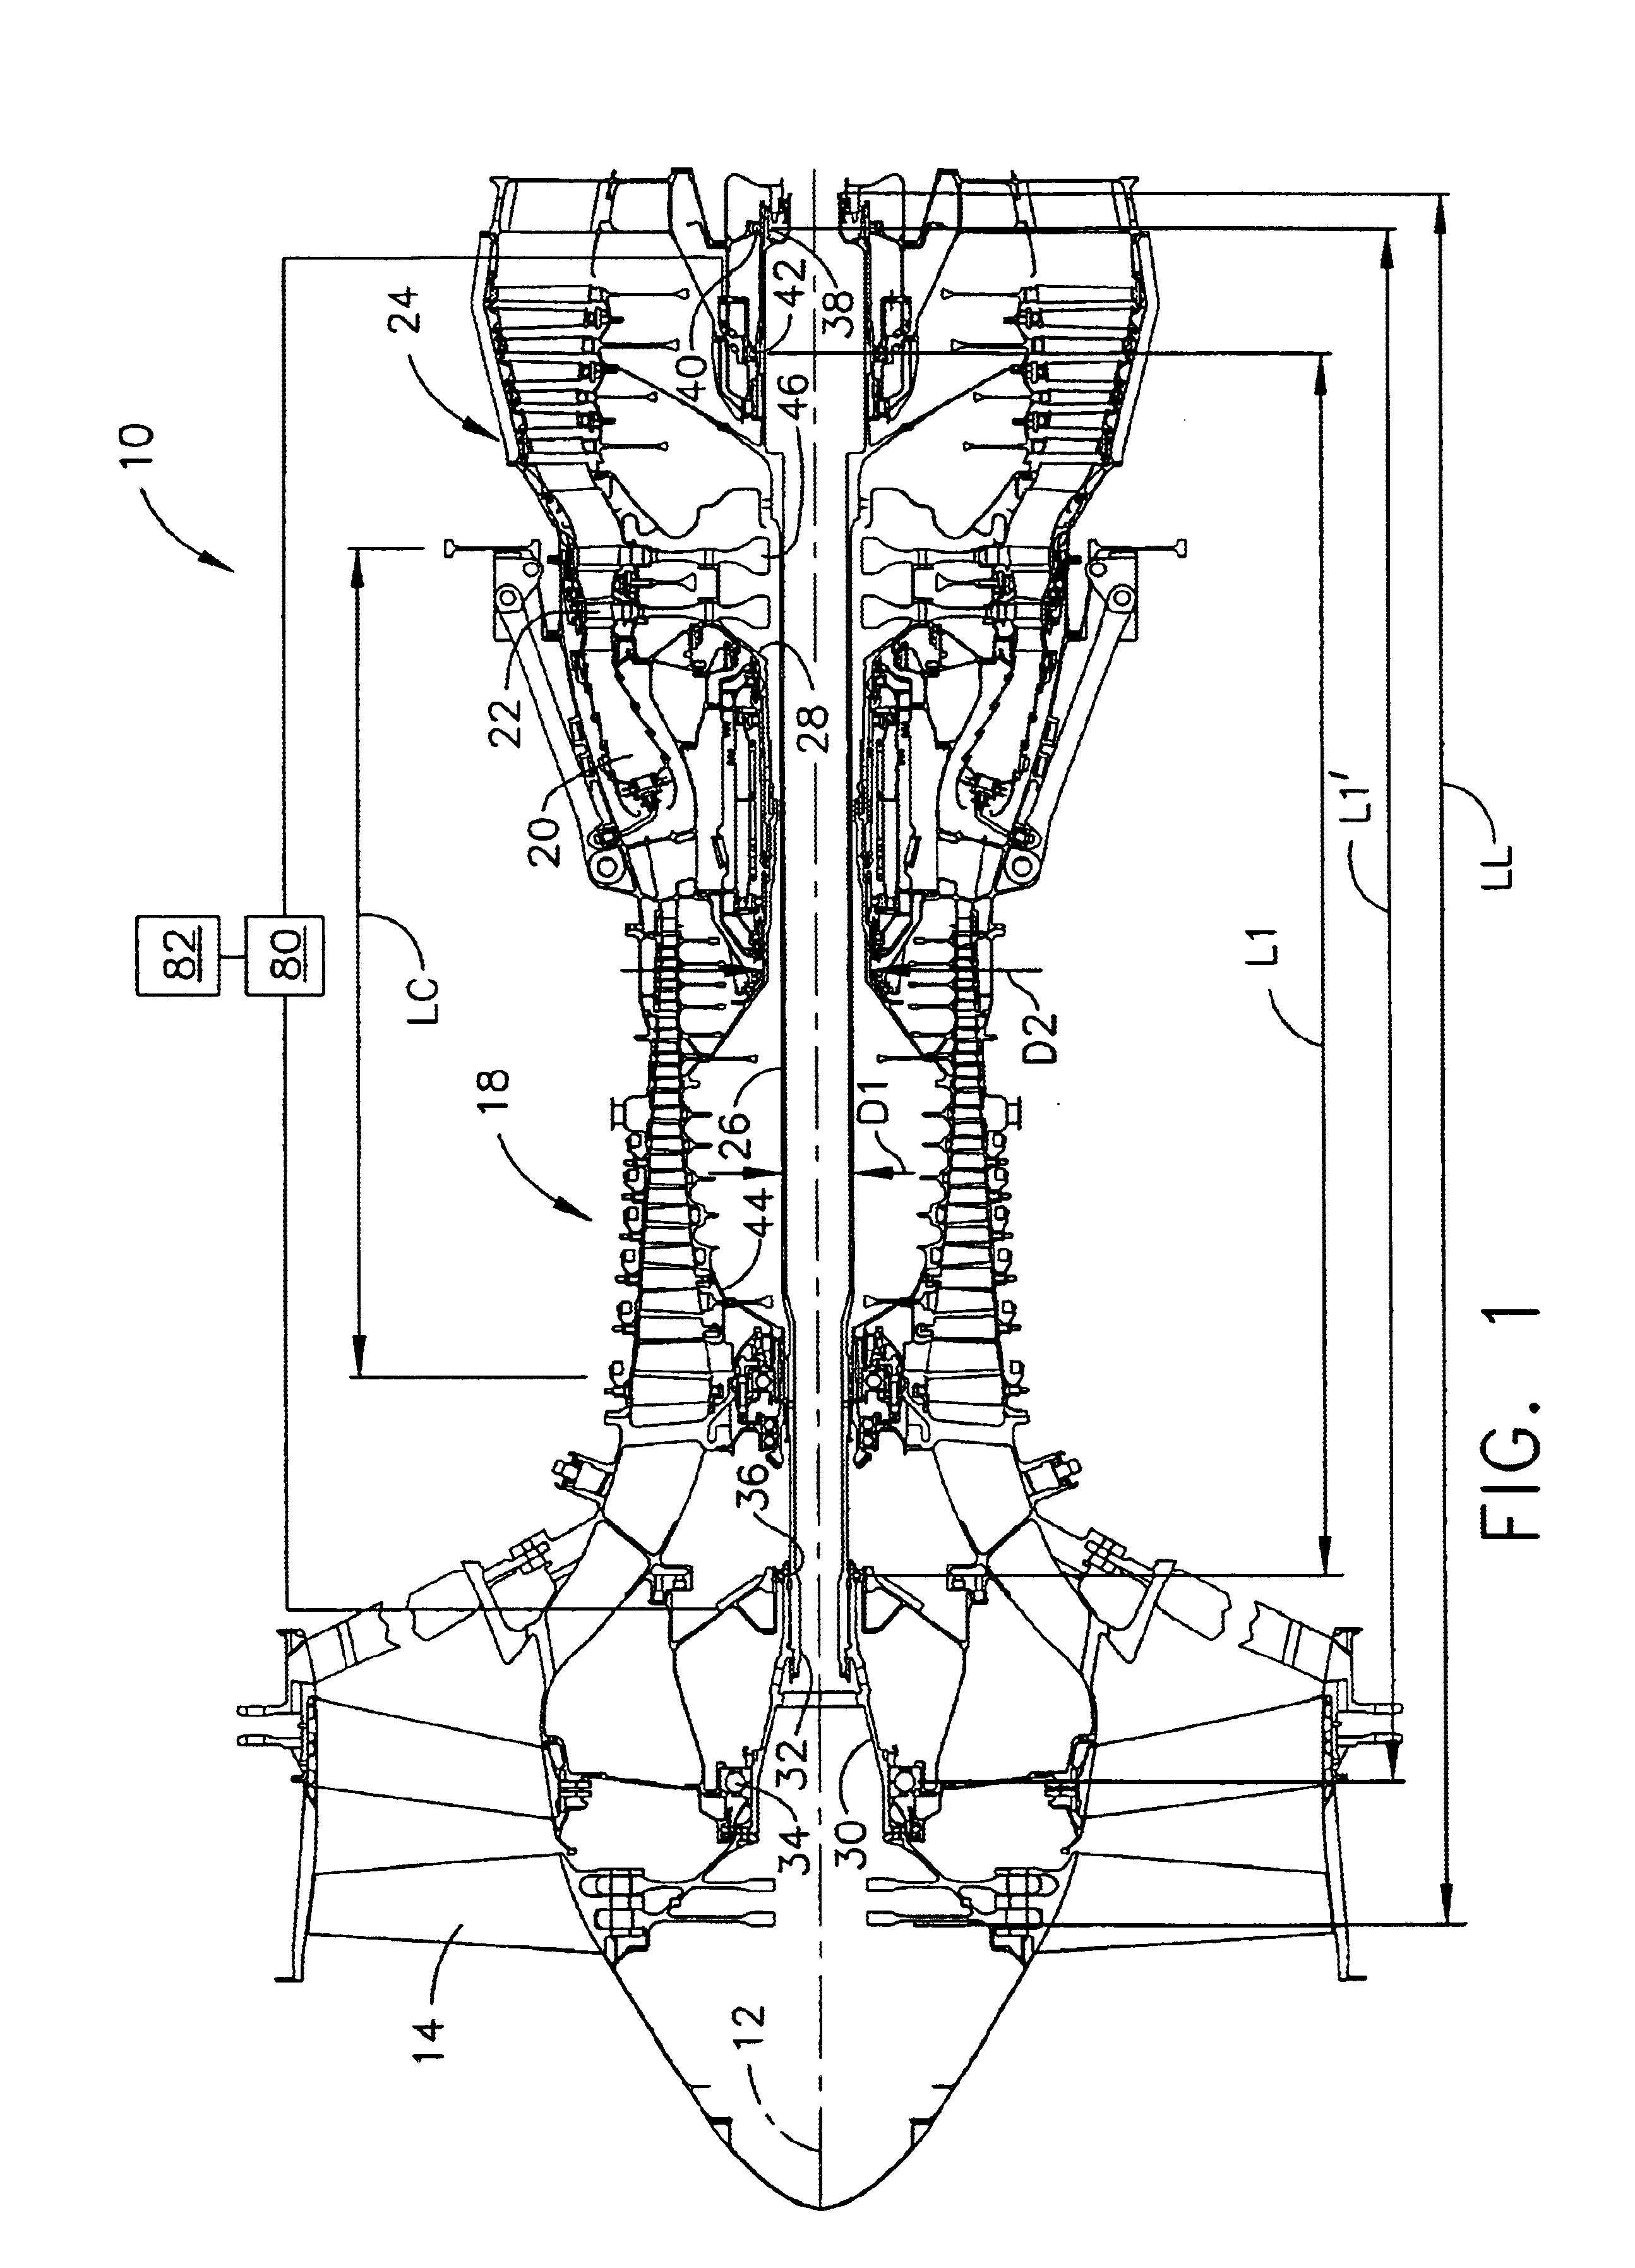 Method and apparatus for varying the critical speed of a shaft